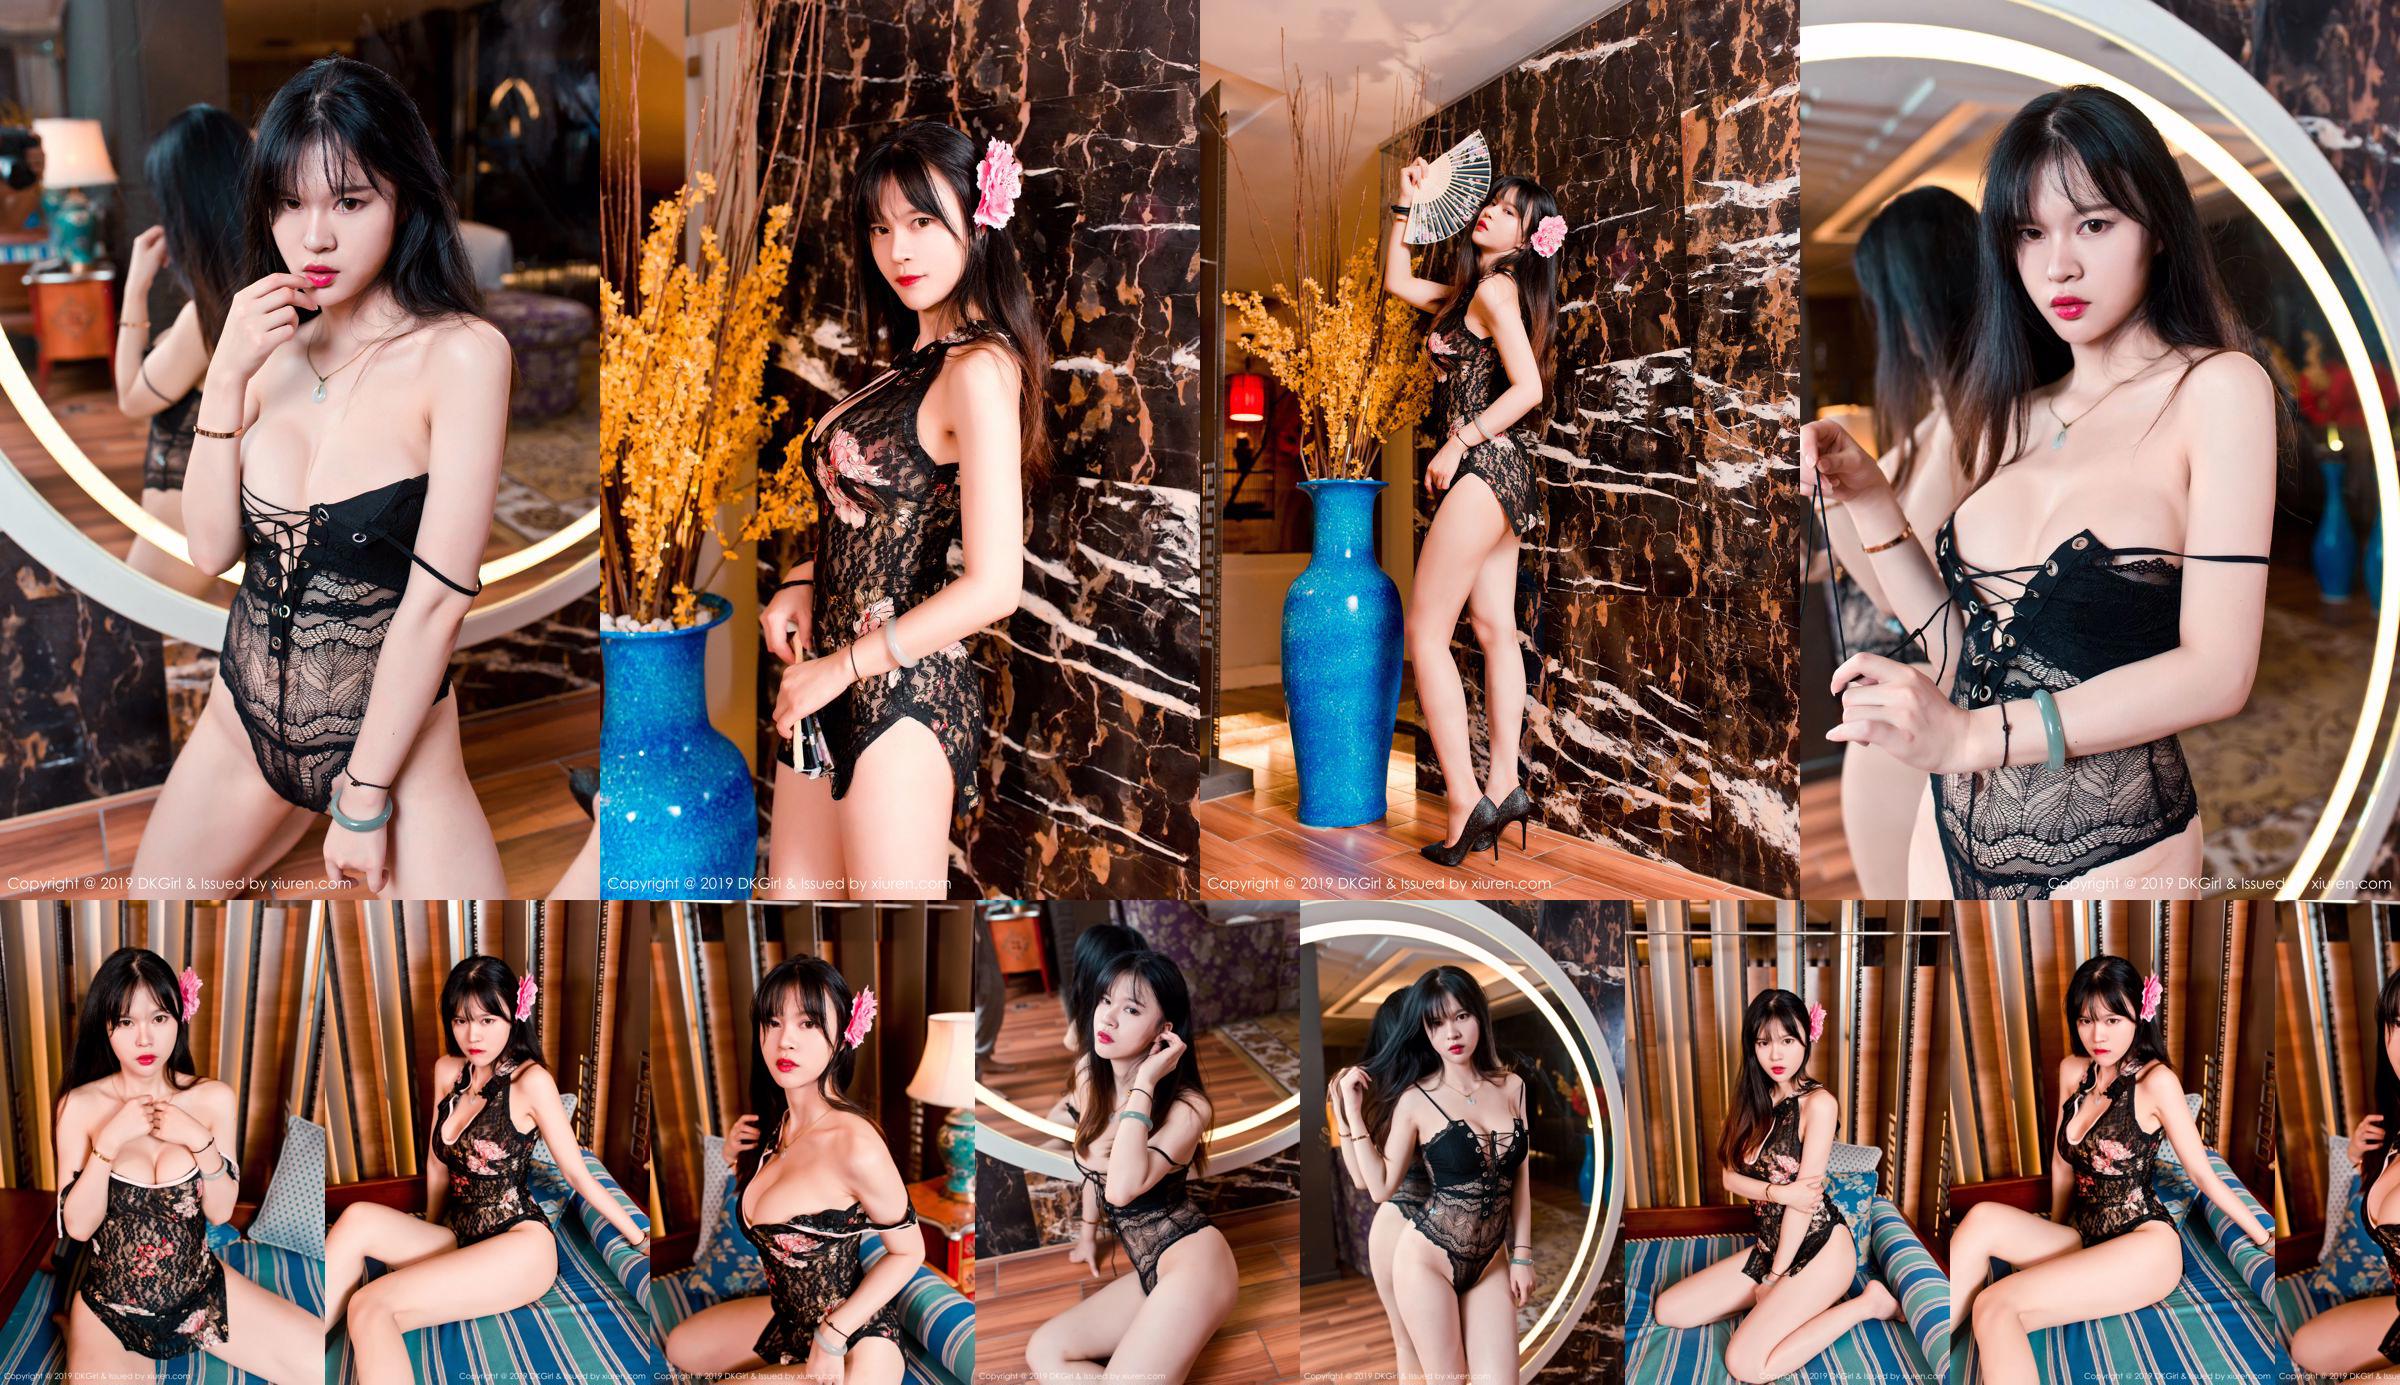 Peach marry "Delicious Hollow Cheongsam and Temptation Lace Underwear" [DKGirl] Vol.093 No.db52b0 Page 1